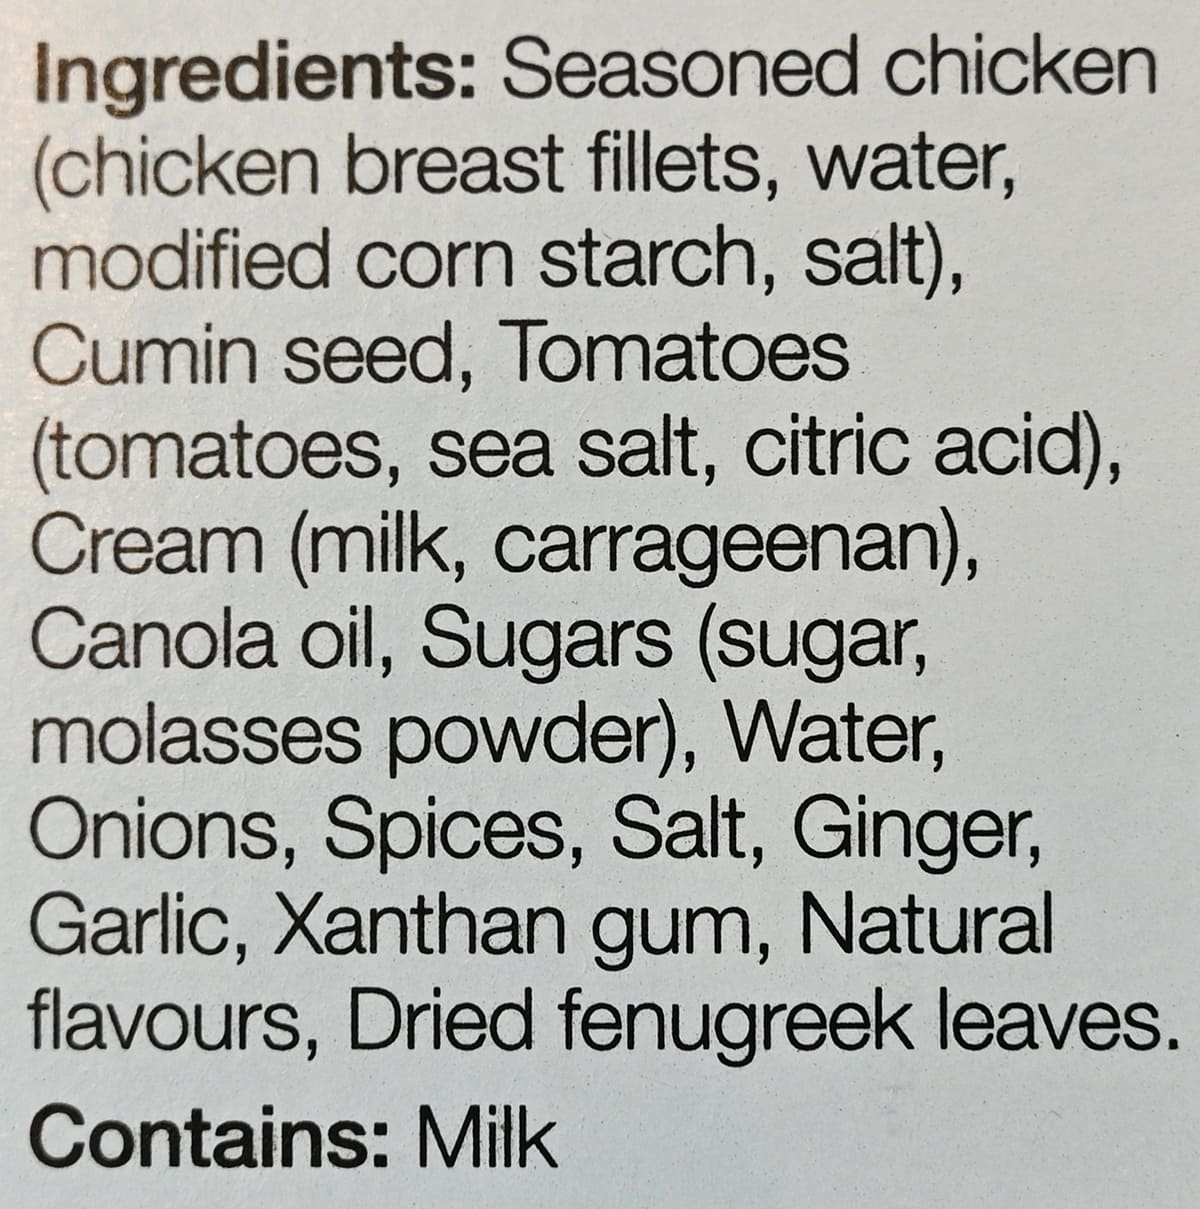 Image of the ingredients list for the chicken tikka masala from the back of the package.